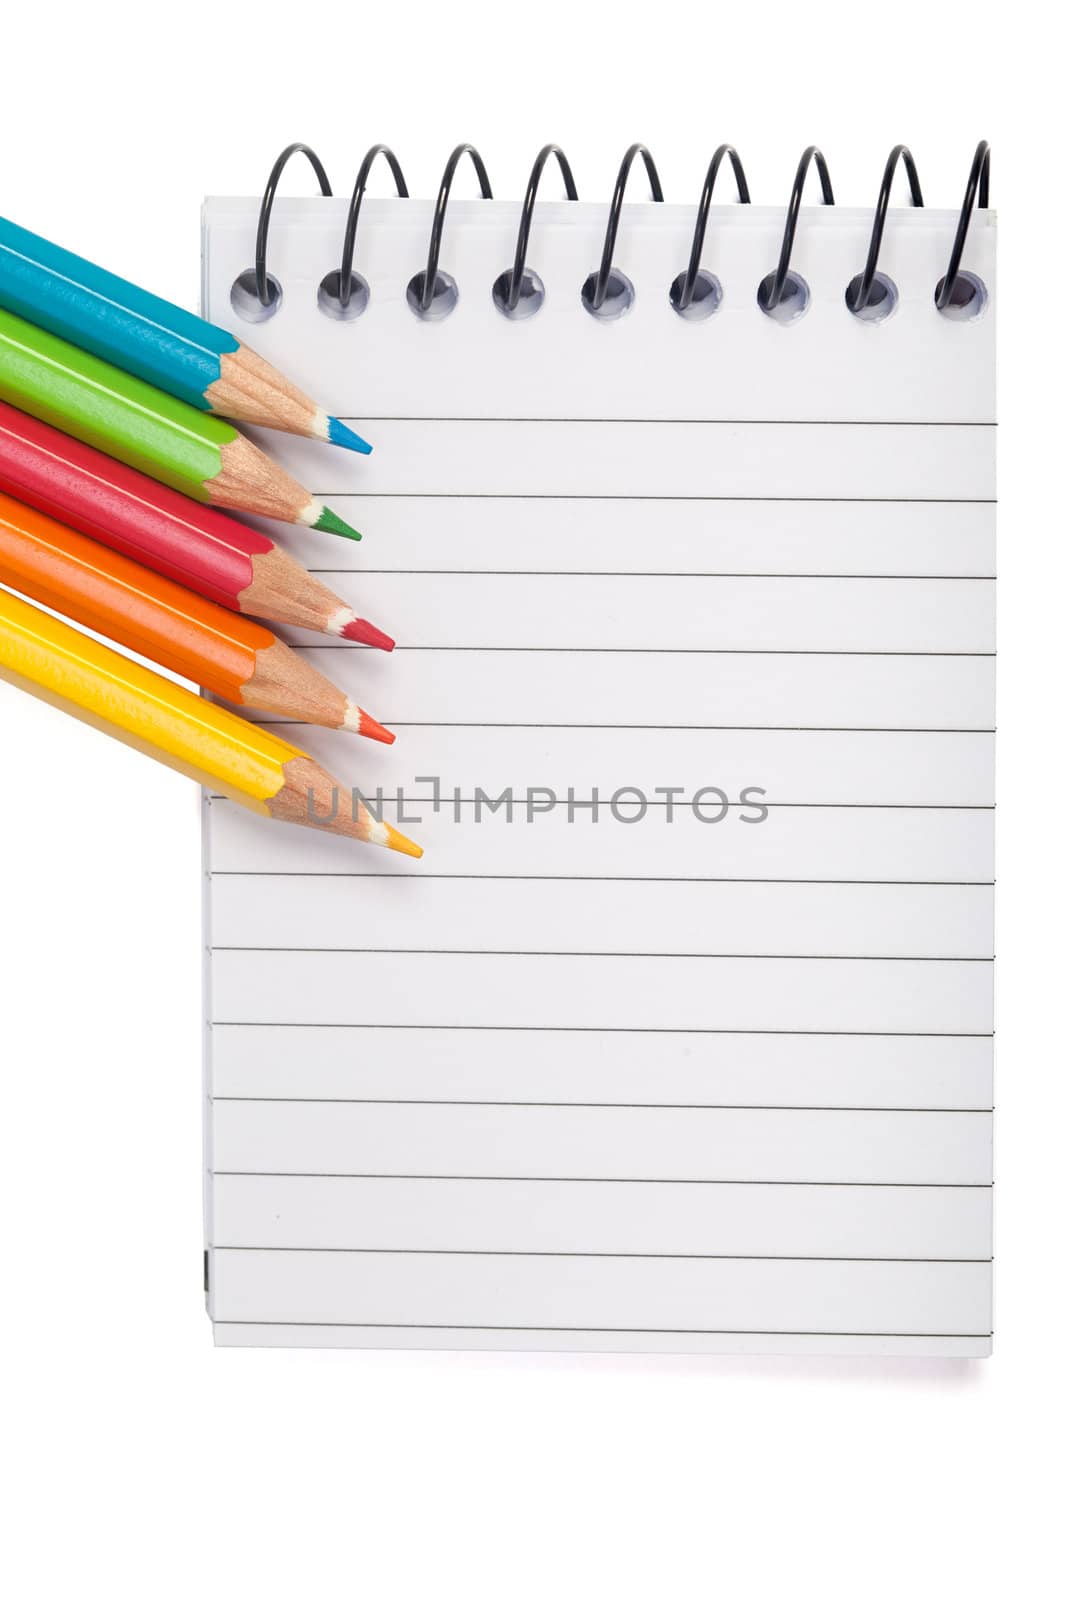 A vivid image with various colored pencils such as yellow, orange, red and blue on a notebook.